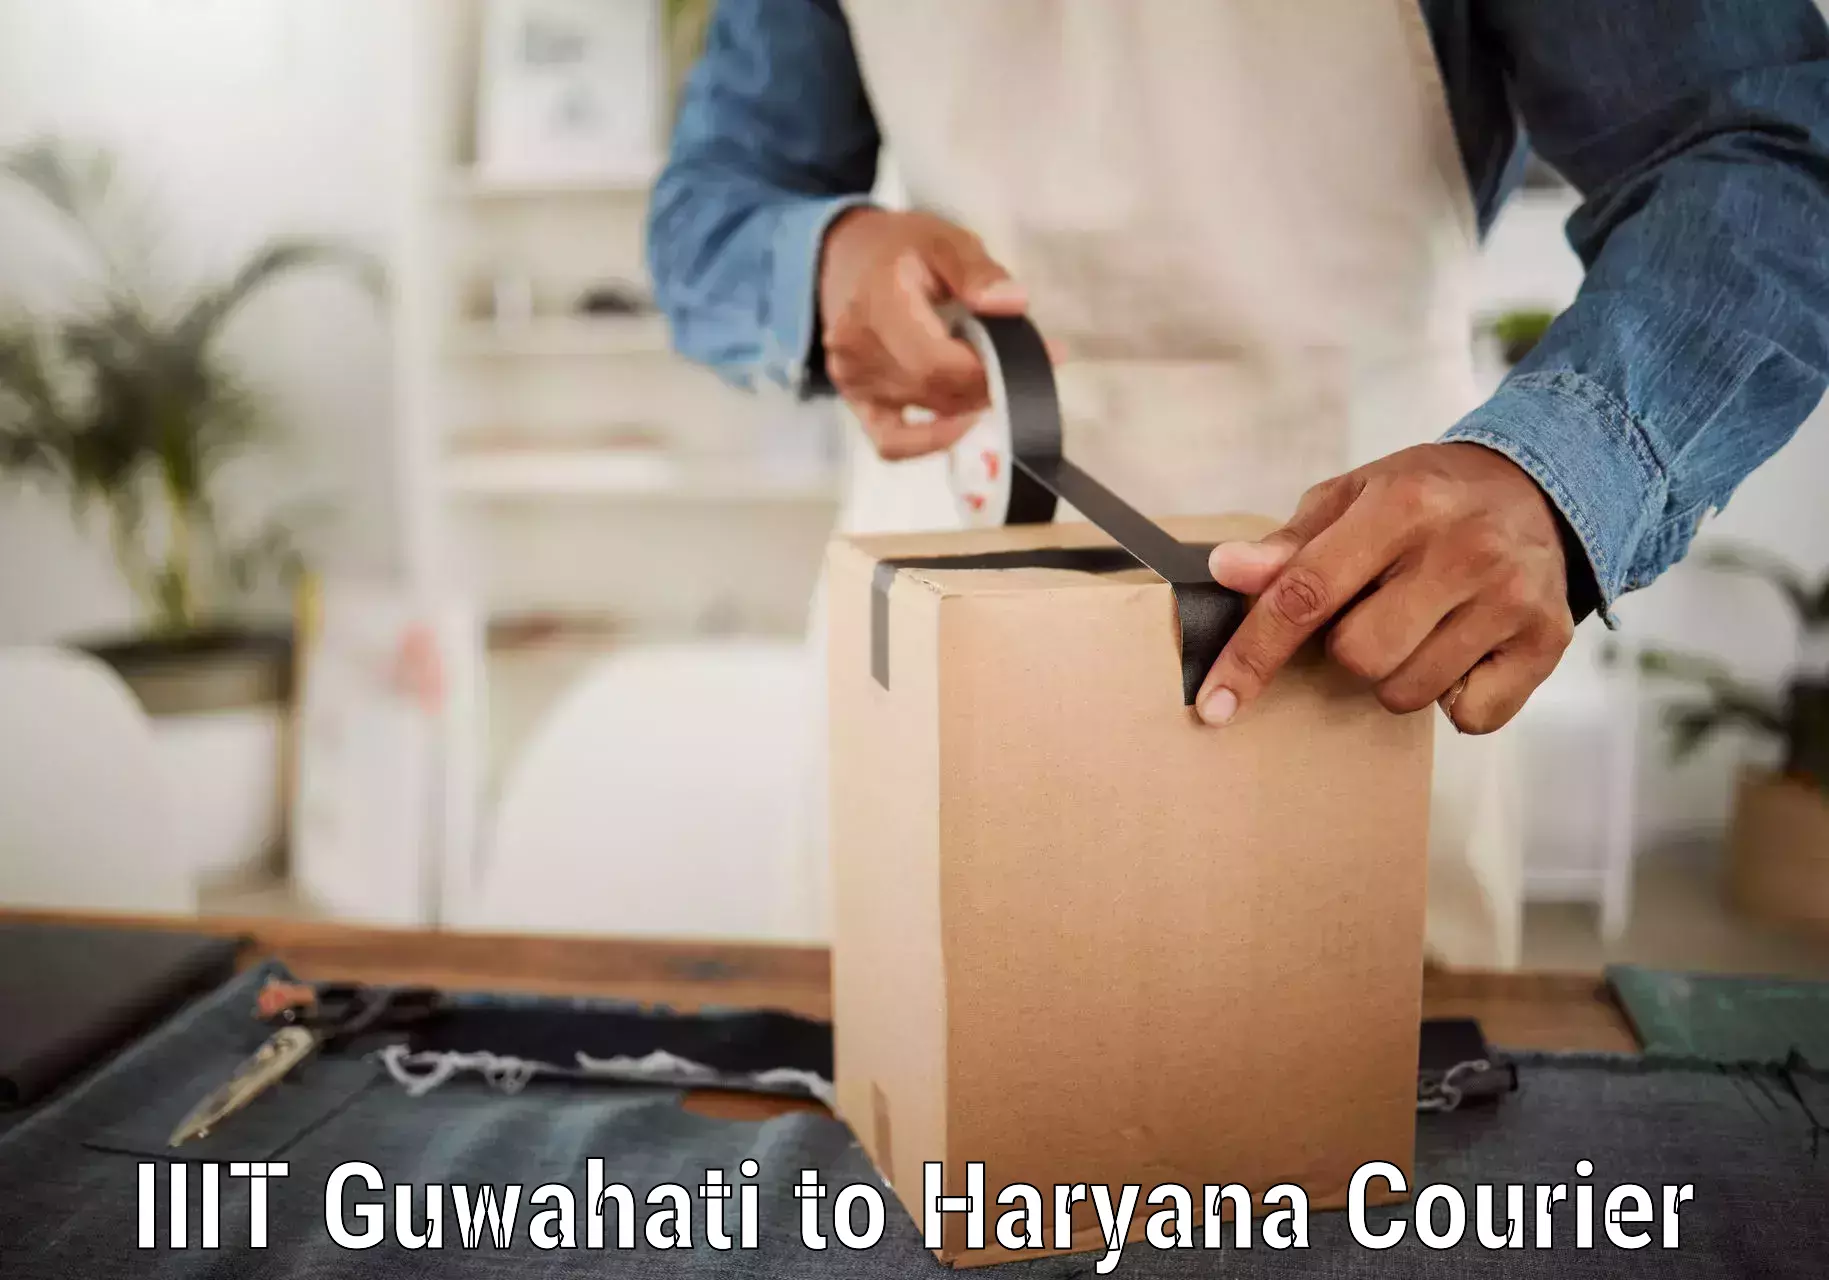 Automated parcel services IIIT Guwahati to Haryana